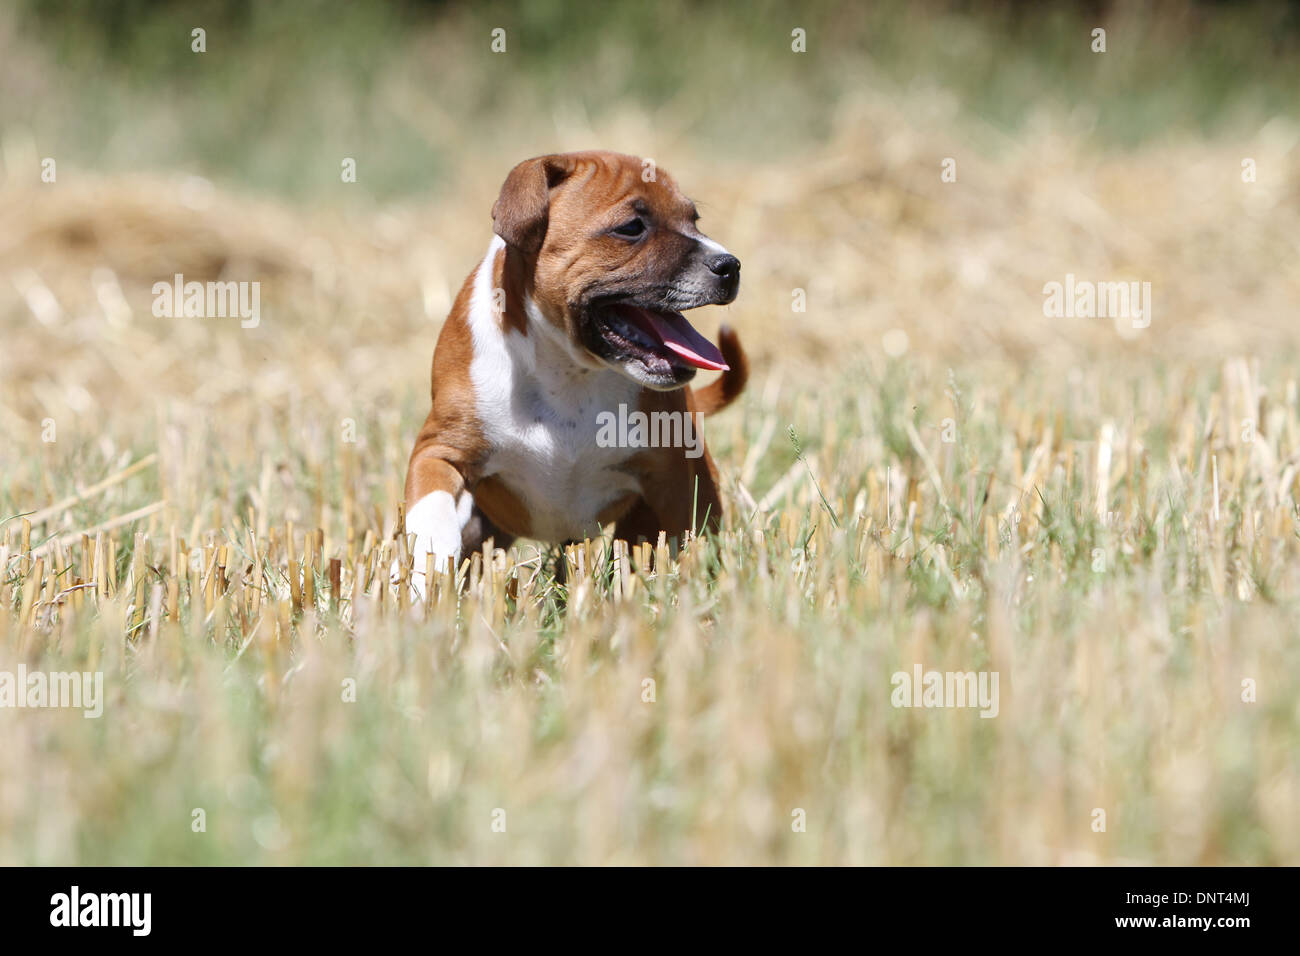 dog Staffordshire Bull Terrier / Staffie  puppy walking in a field Stock Photo